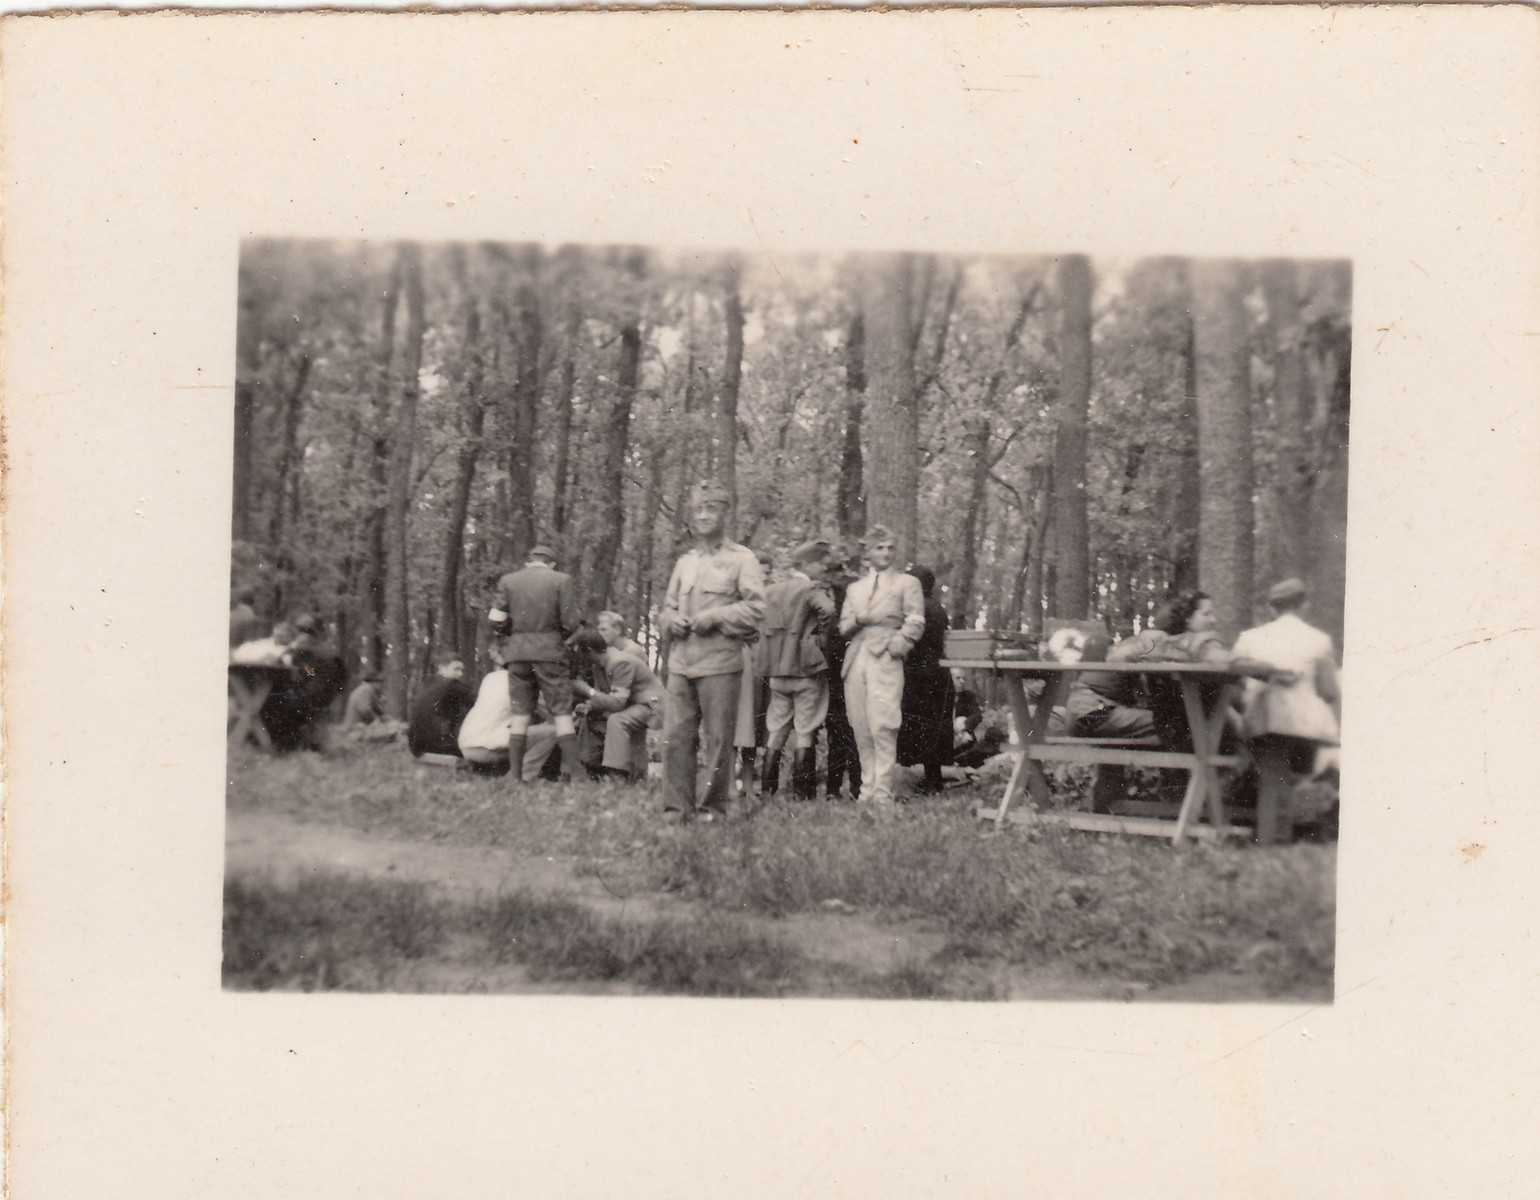 Members of a Hungarin labor battalion stop for lunch at a picnic table.  They are joined by a group of visitors.